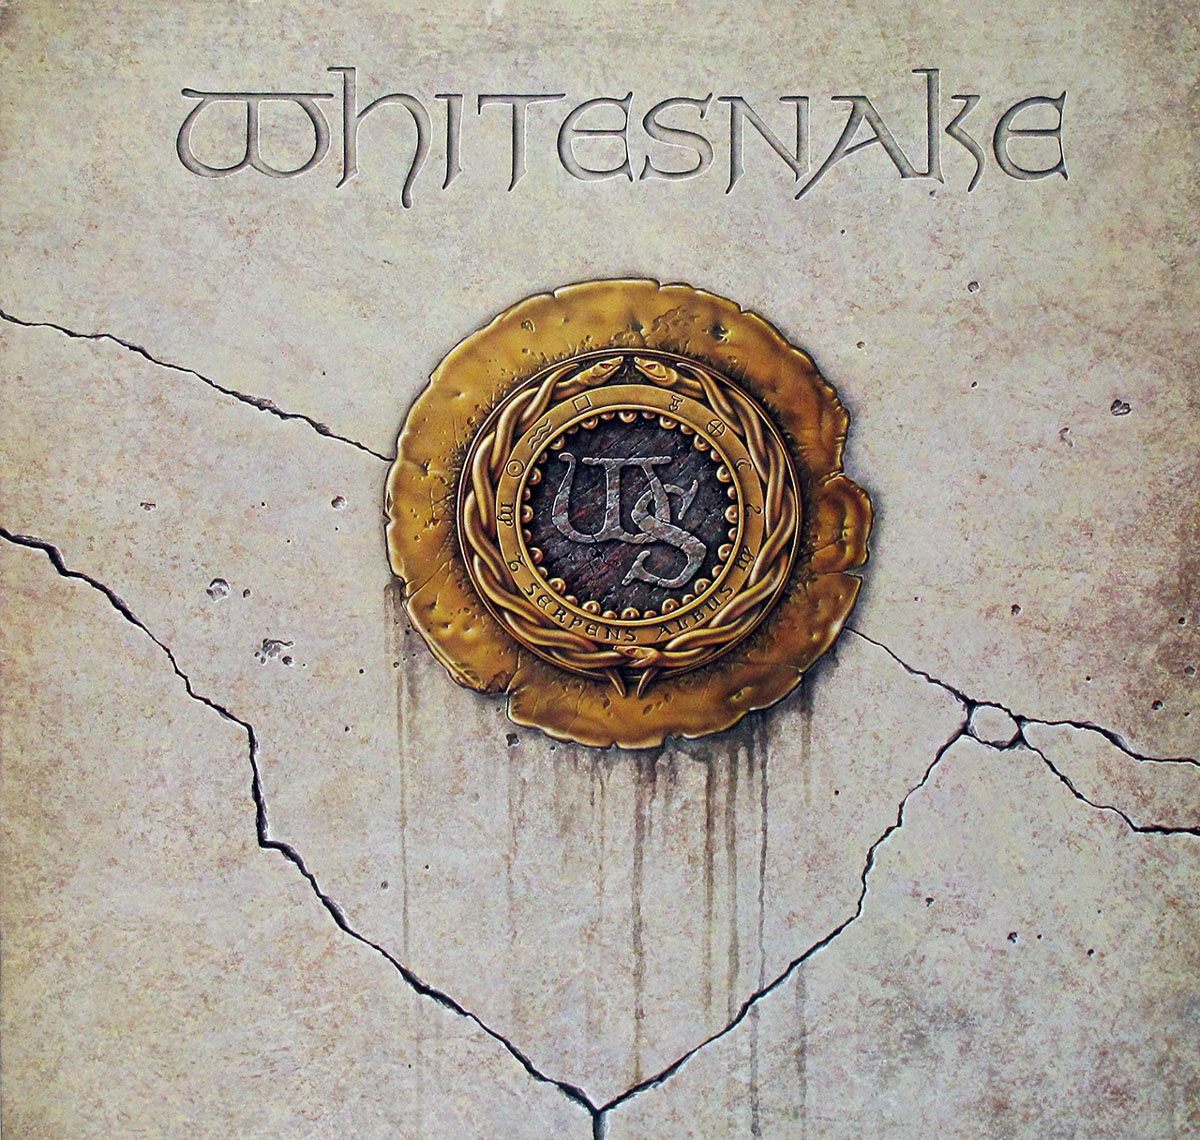 High Resolution Photos of whitesnake self-titled canada 